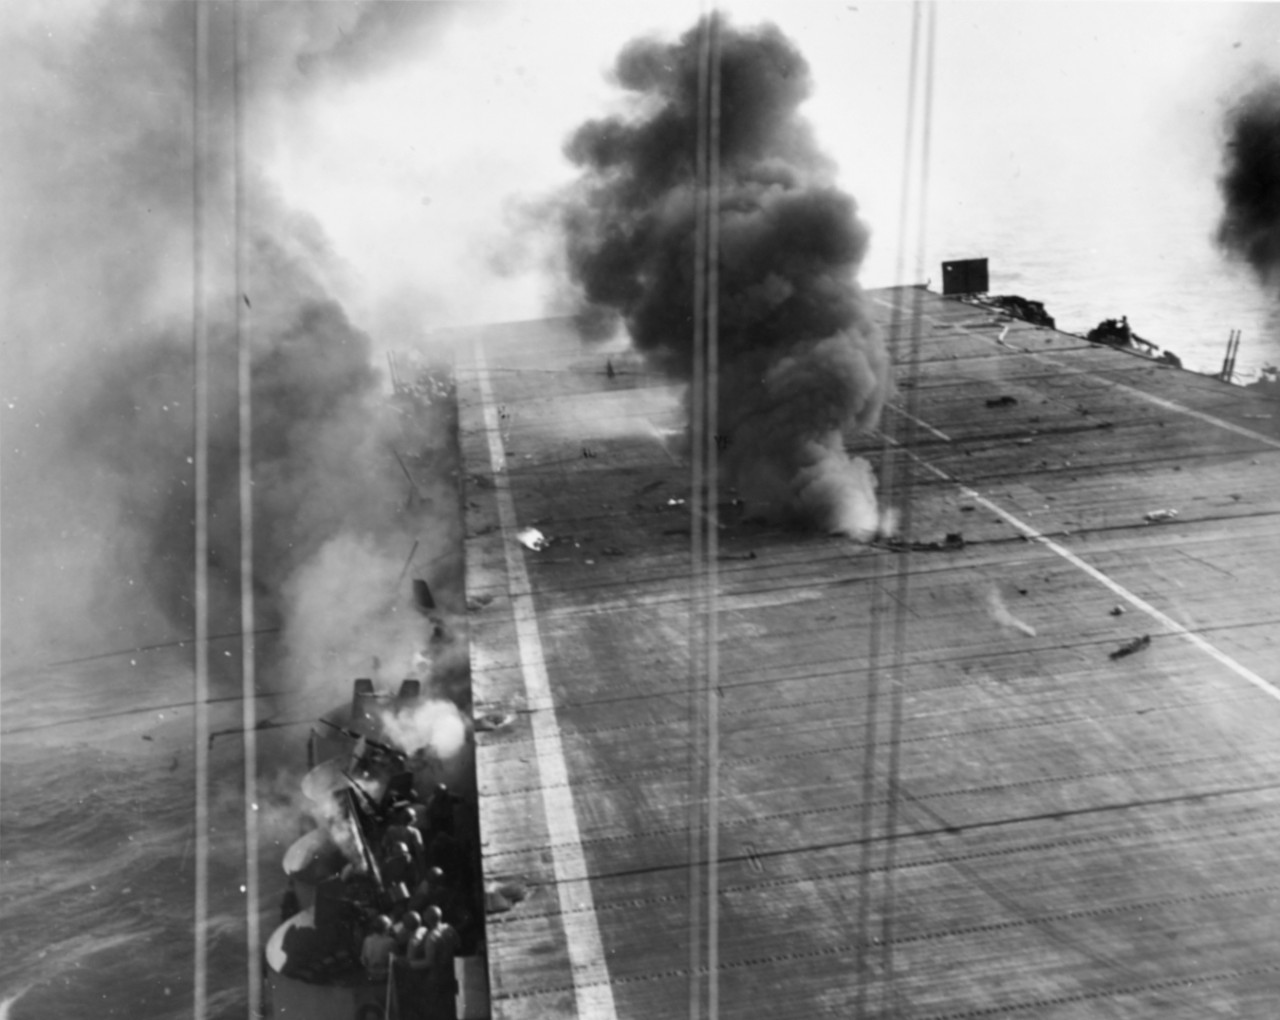 "Effect of a crash dive on Suwanee flight deck. 250 kilogram bomb has just exploded between flight an dhangar decks and fire billows out, 25 October 1944. (Naval History and Heritage Command NH 71528)